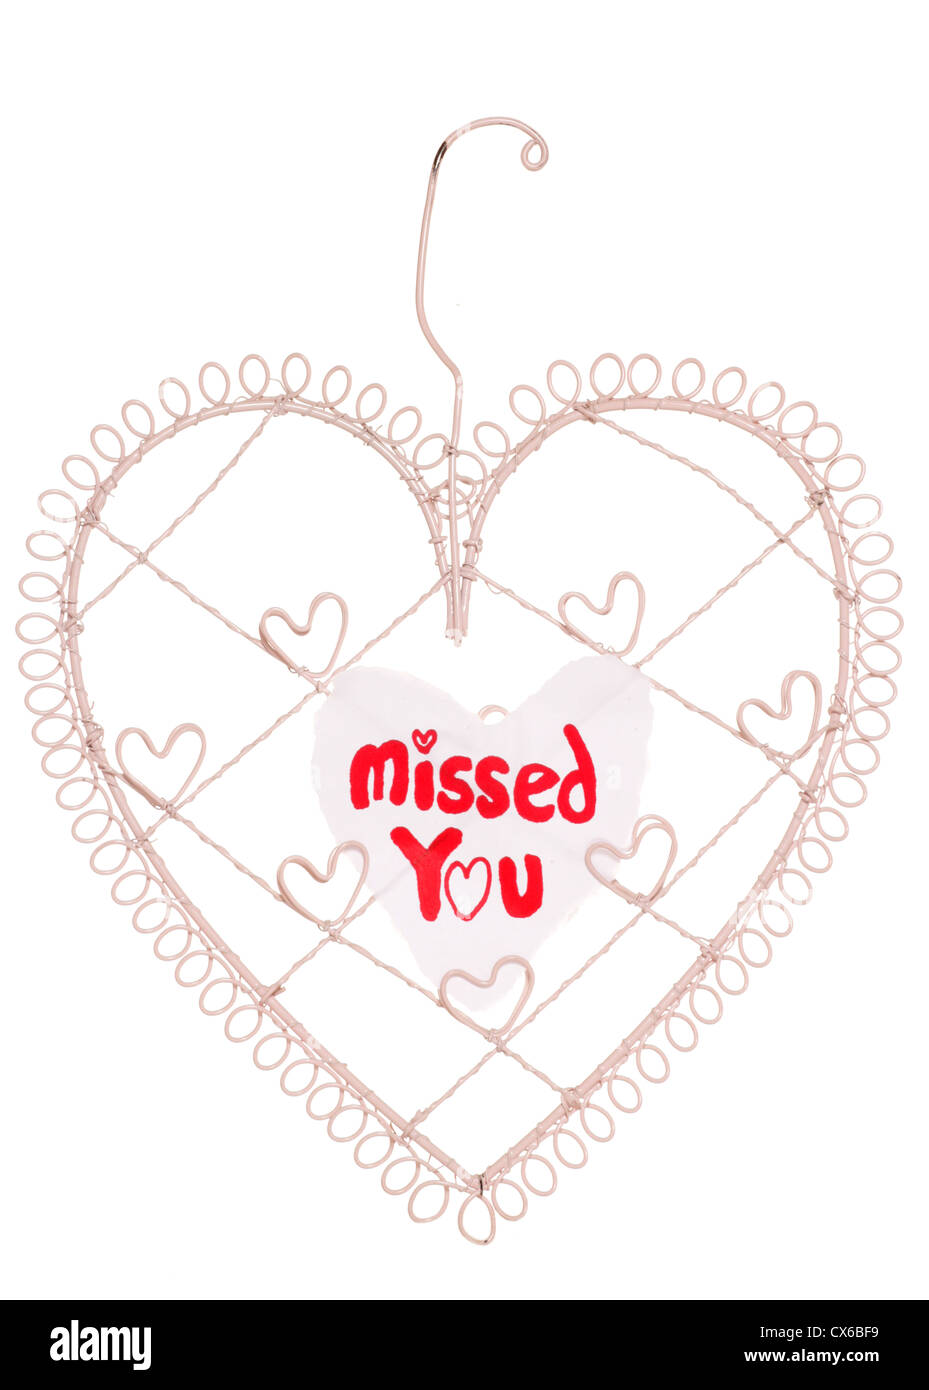 Missed you message on a heart note board studio cutout Stock Photo